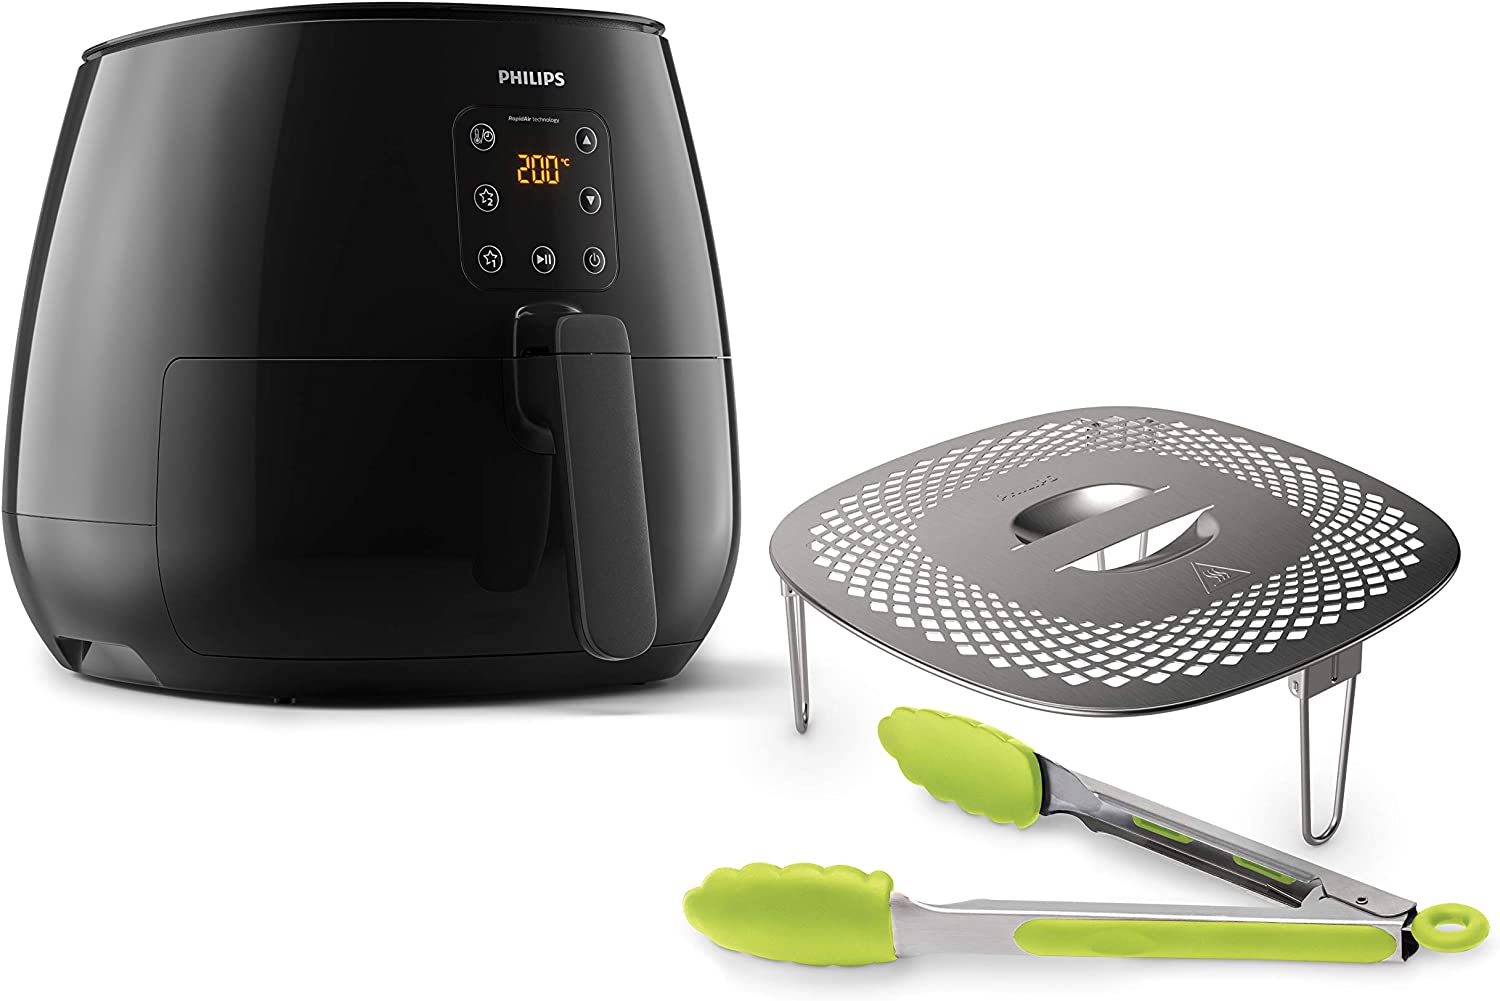 Philips Domestic Appliances Philips Airfryer Essential XL - 1.2 kg Fries - 3 to 4 People - 90% Less Fat - Digital Touchscreen - Dishwasher Safe Parts - with Recipe Book and Splash Guard - HD9262/90